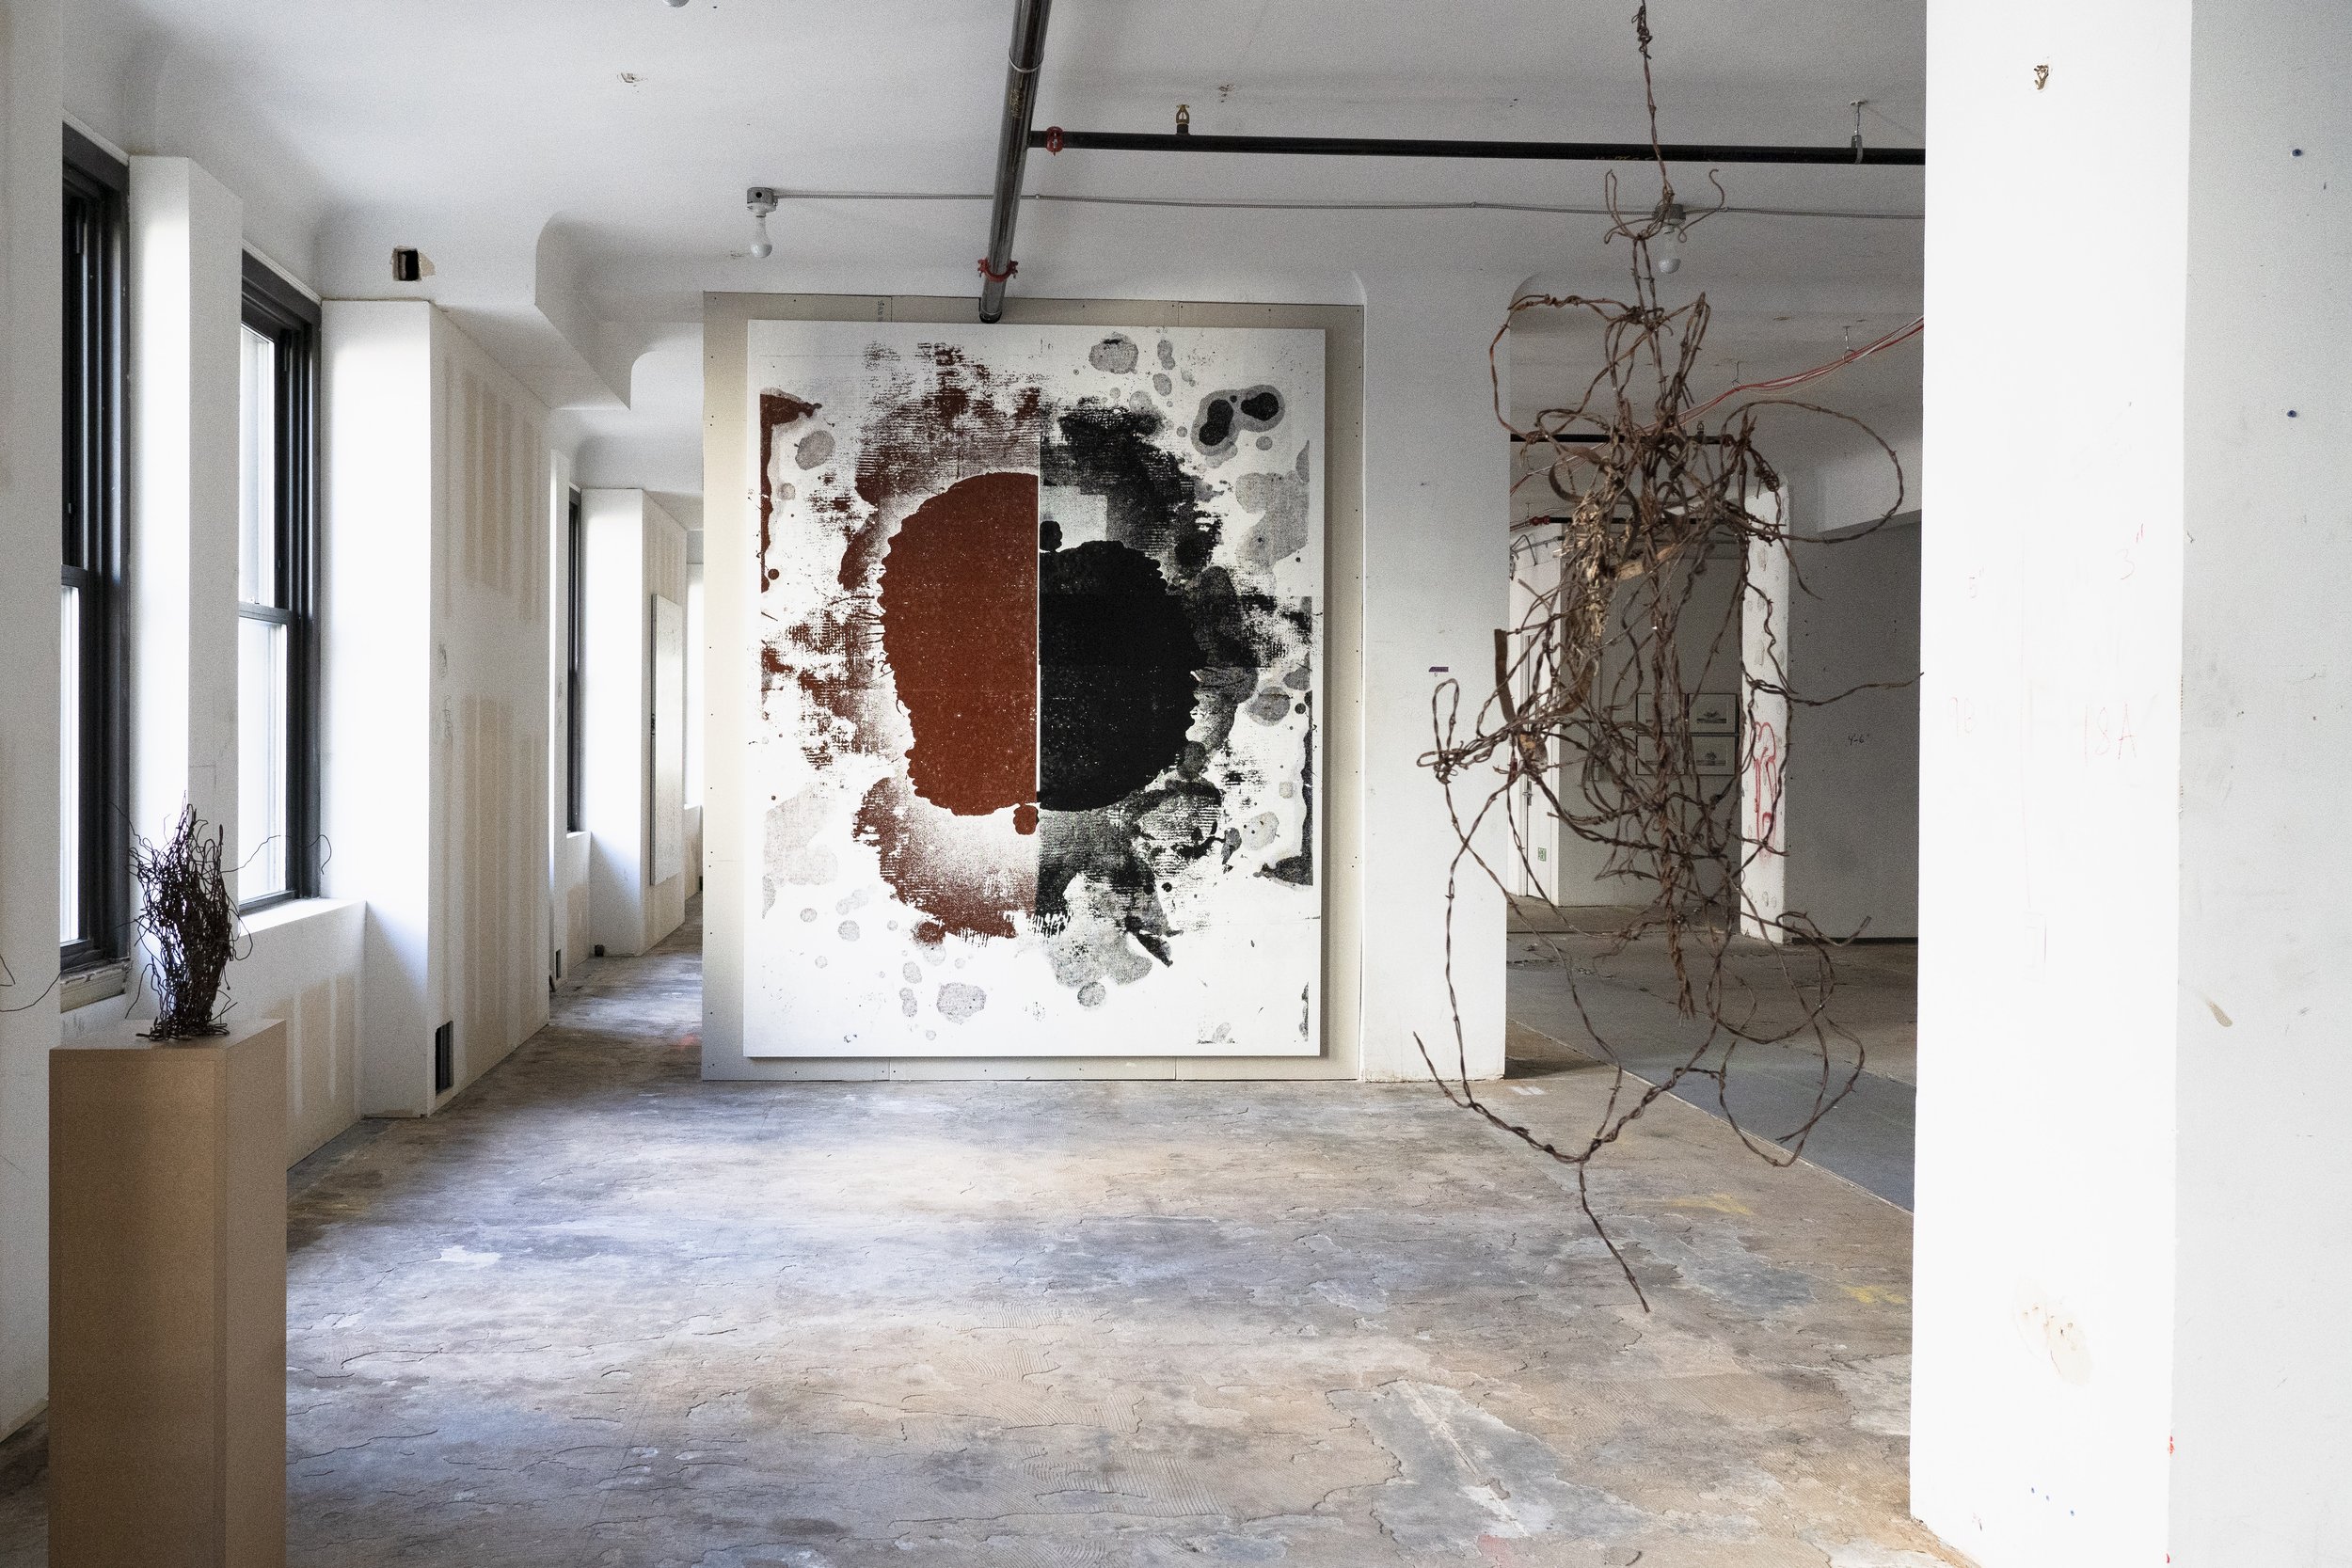 Christopher Wool's "See Stop Run" Dances in Dilapidation